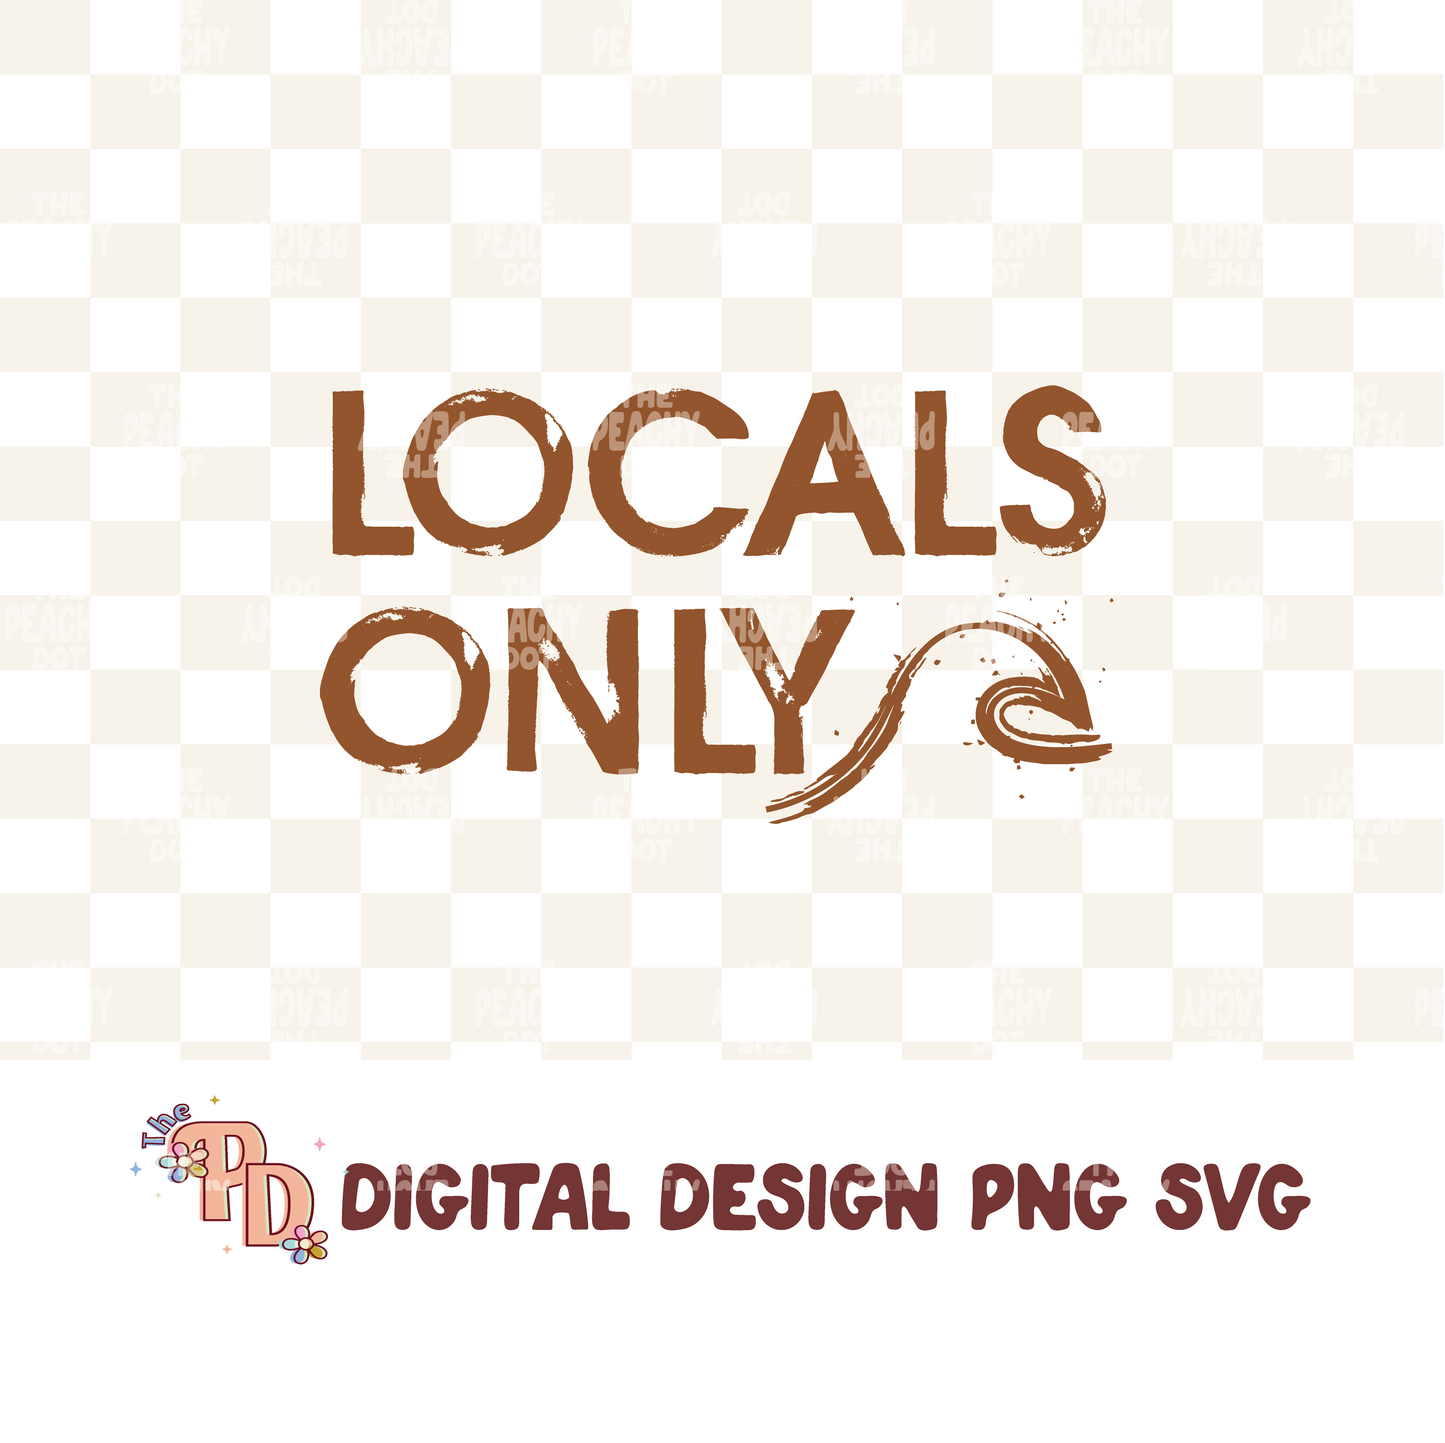 Locals Only Png Svg